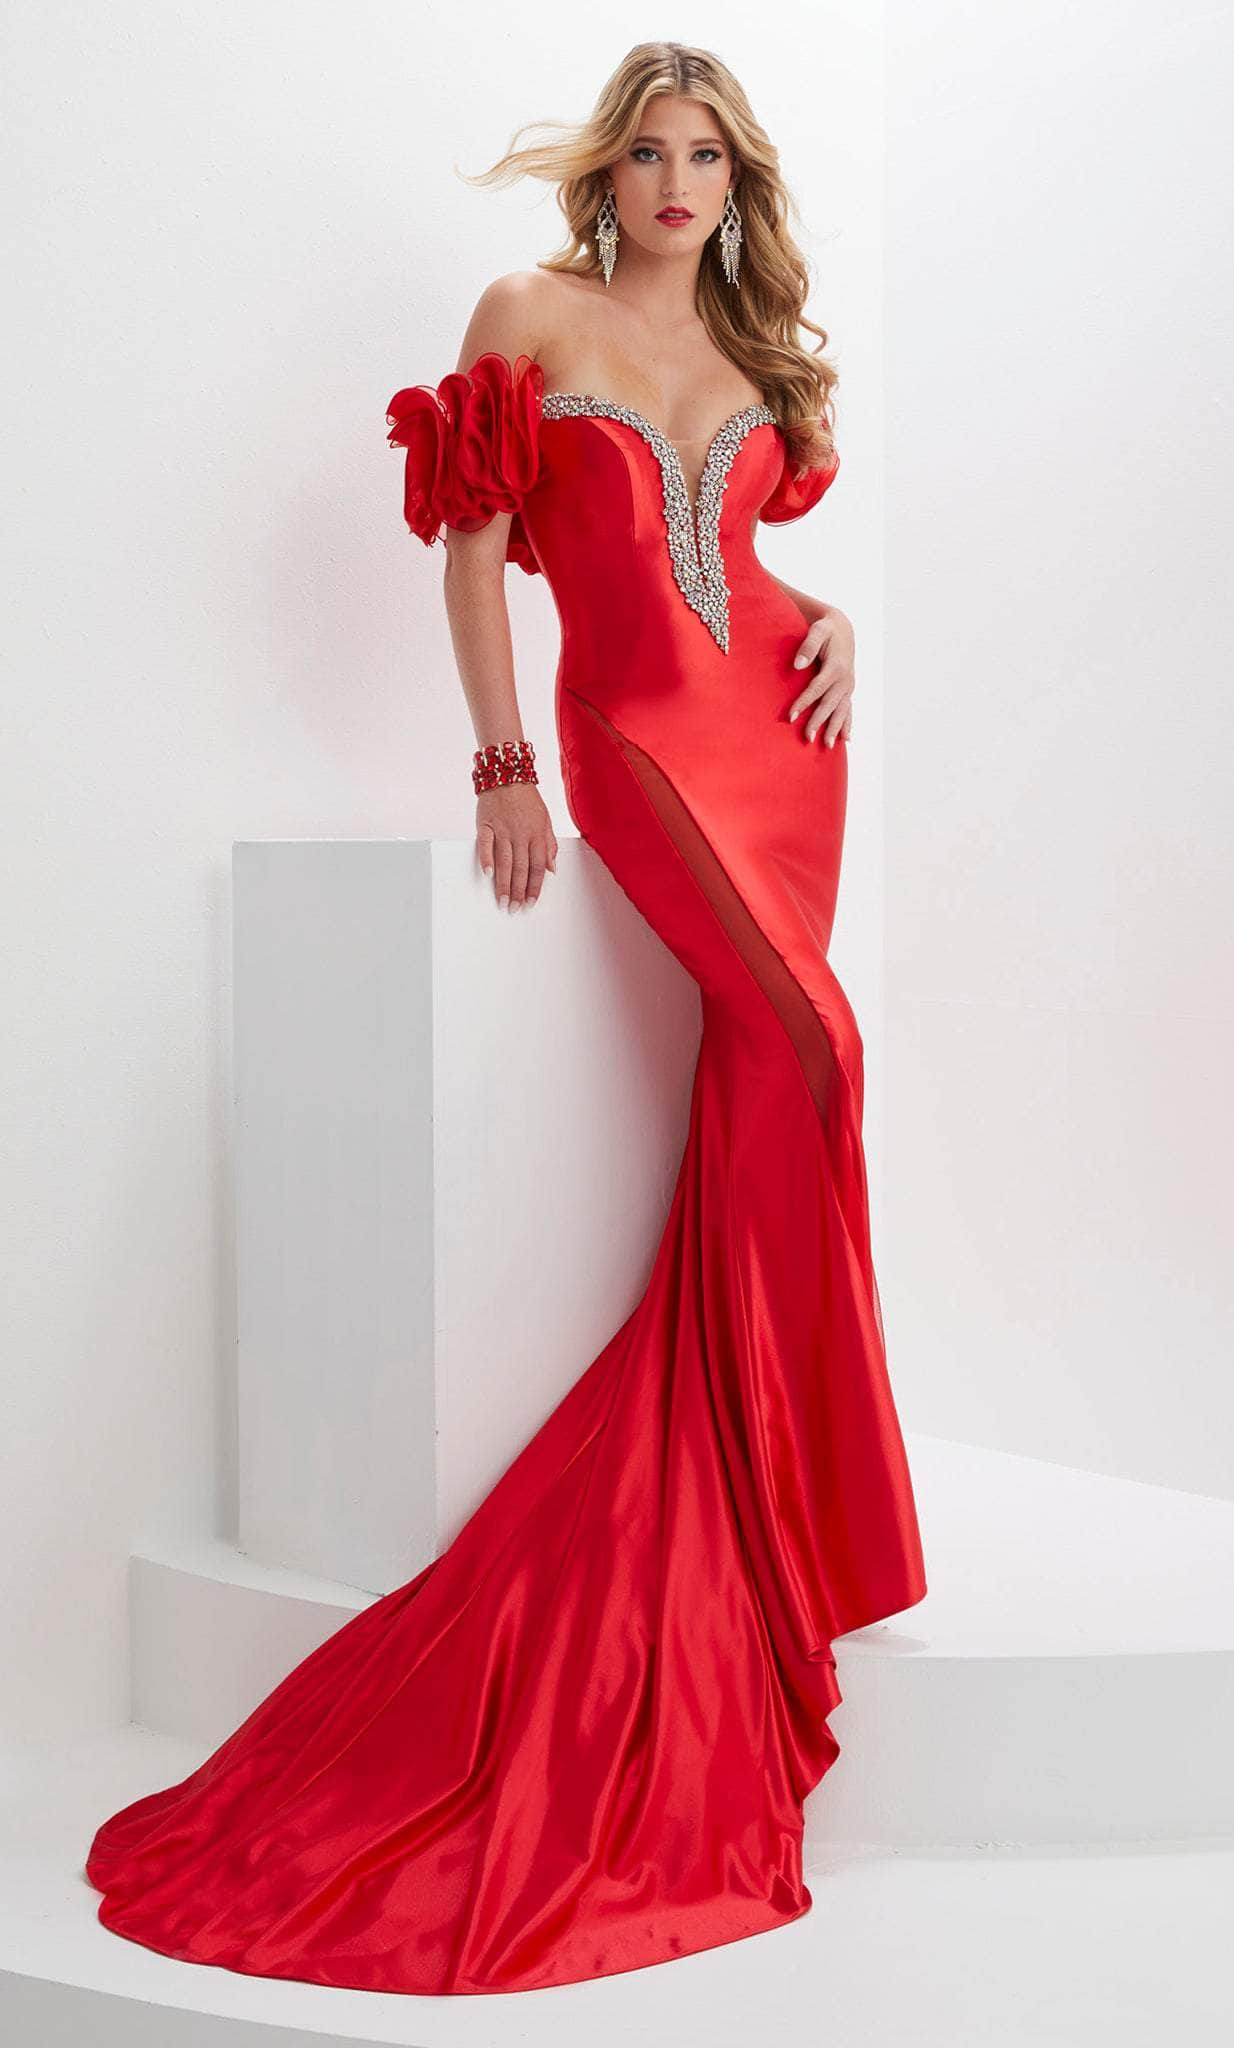 Panoply 14126 - Off Shoulder Ruffle Evening Gown
